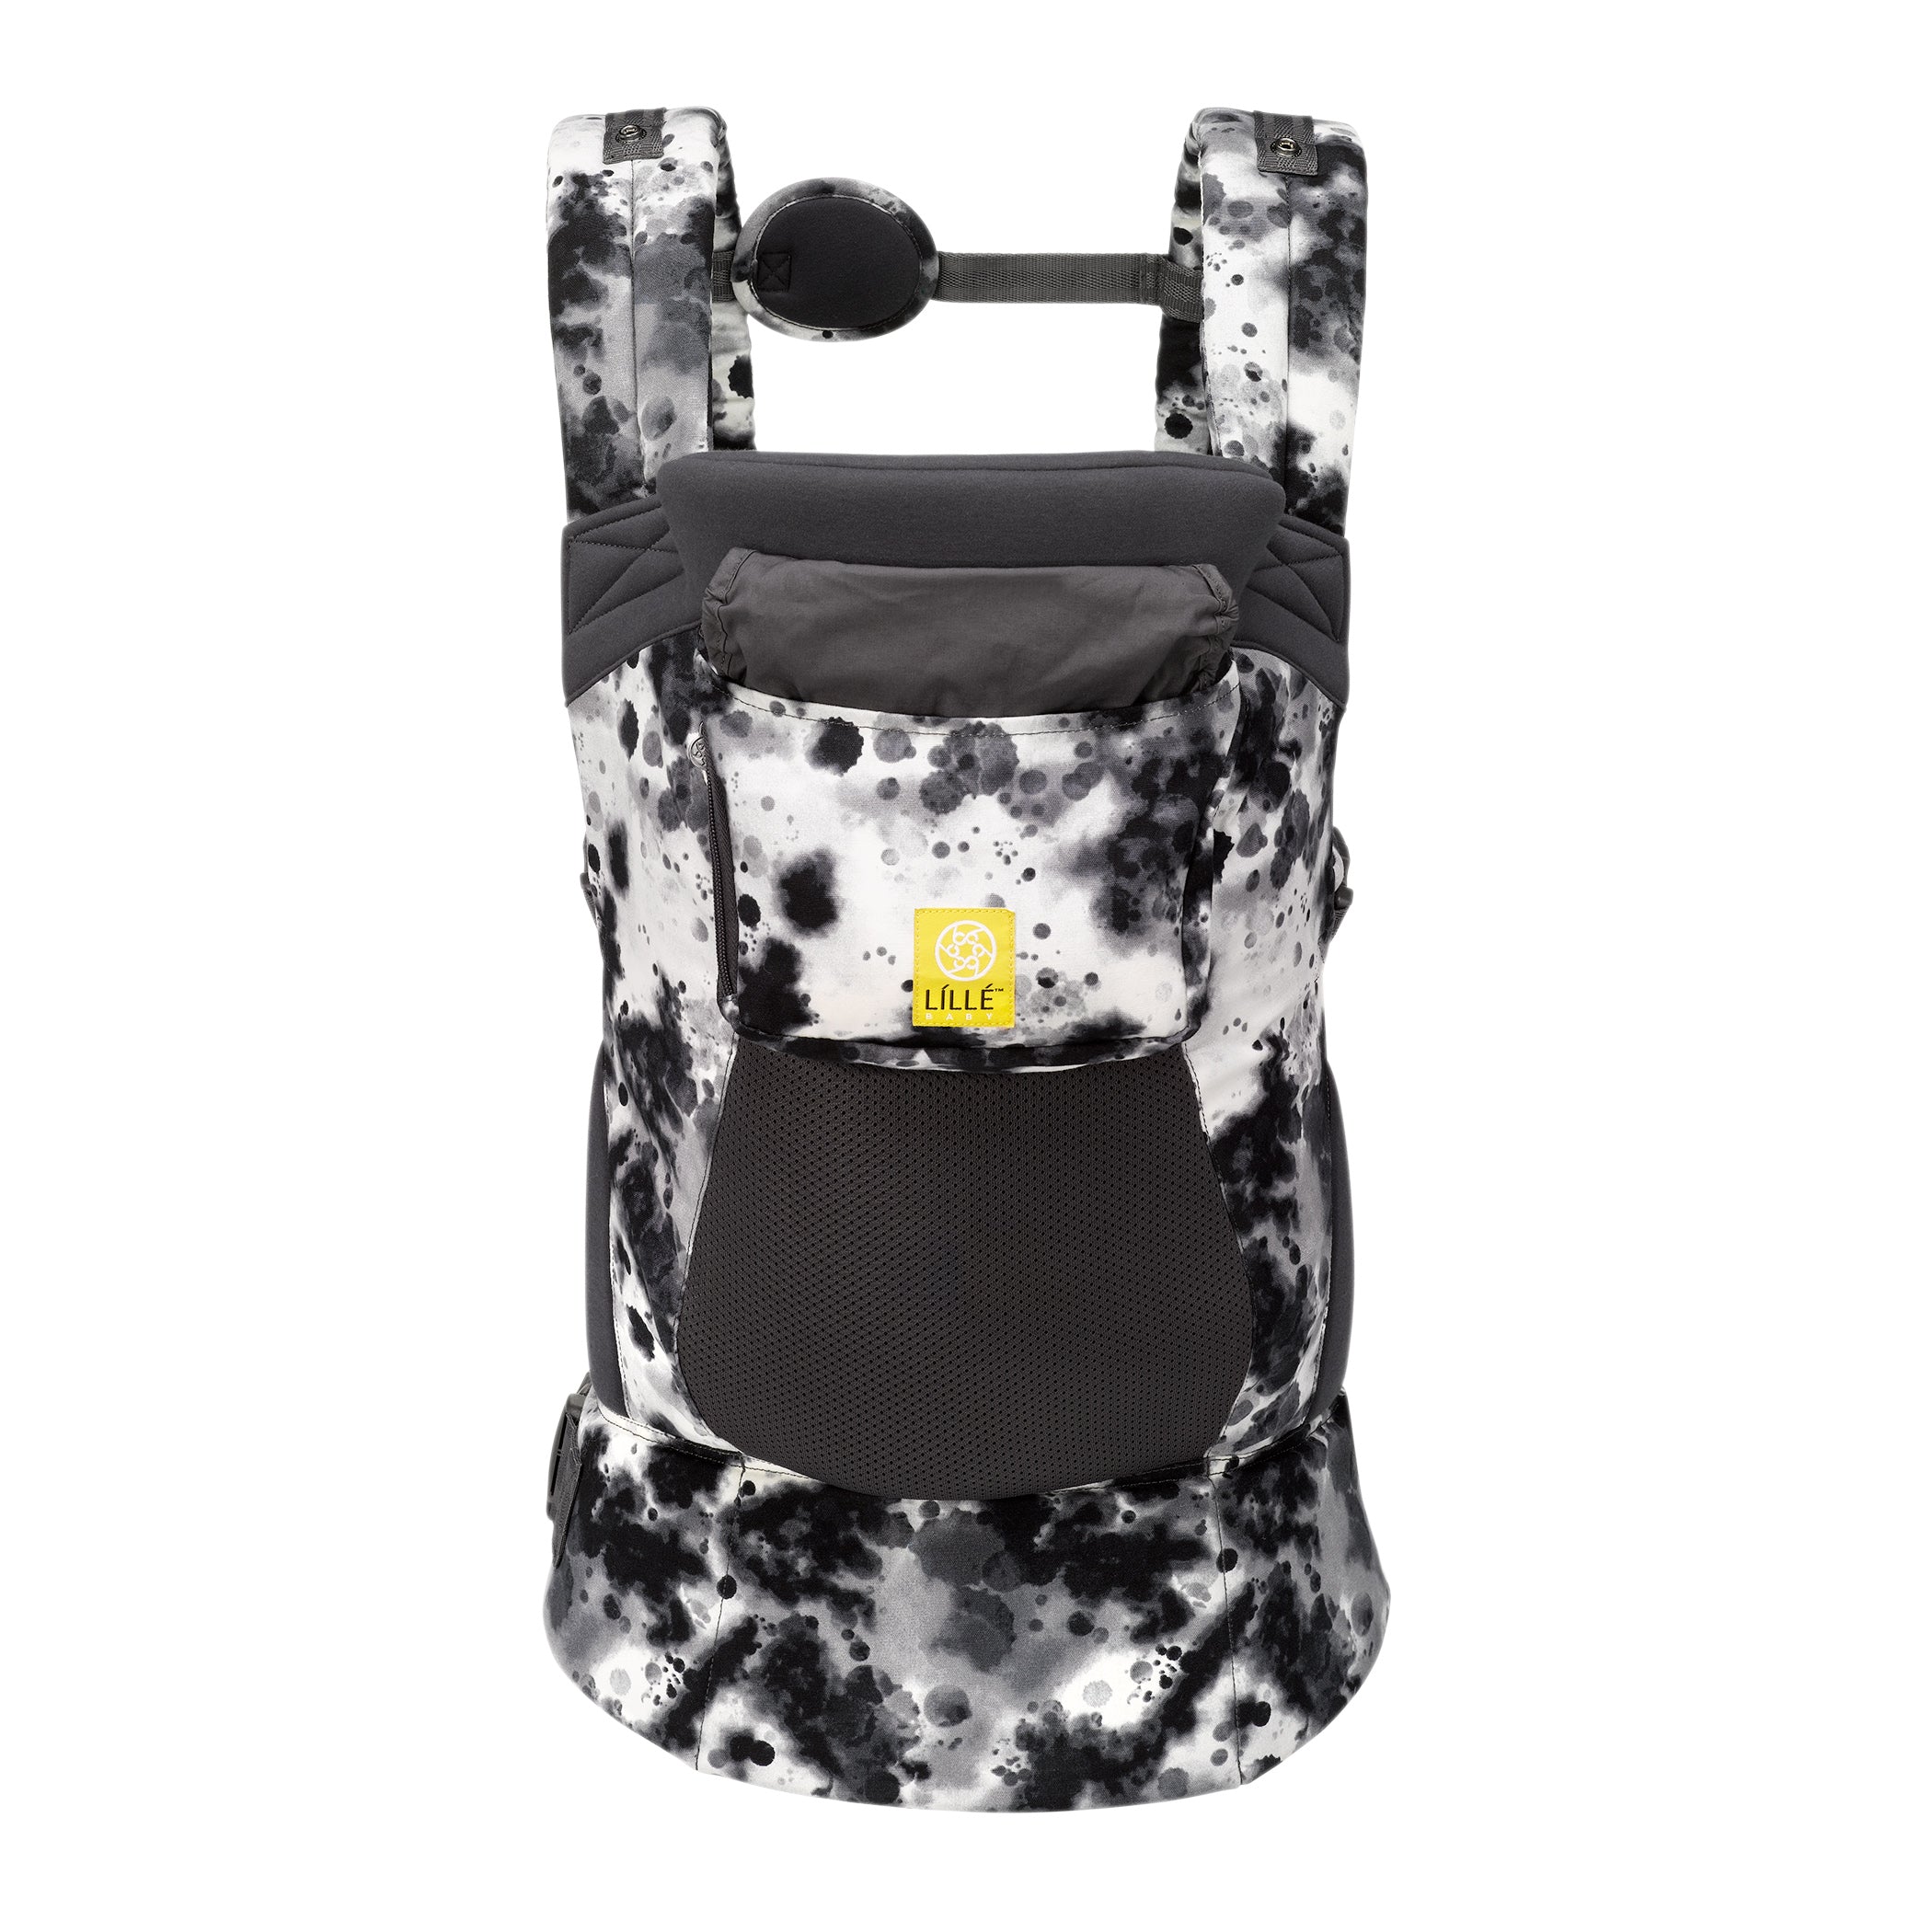 Toddler Carrier CarryOn Airflow in Galaxy Space Dye DLX